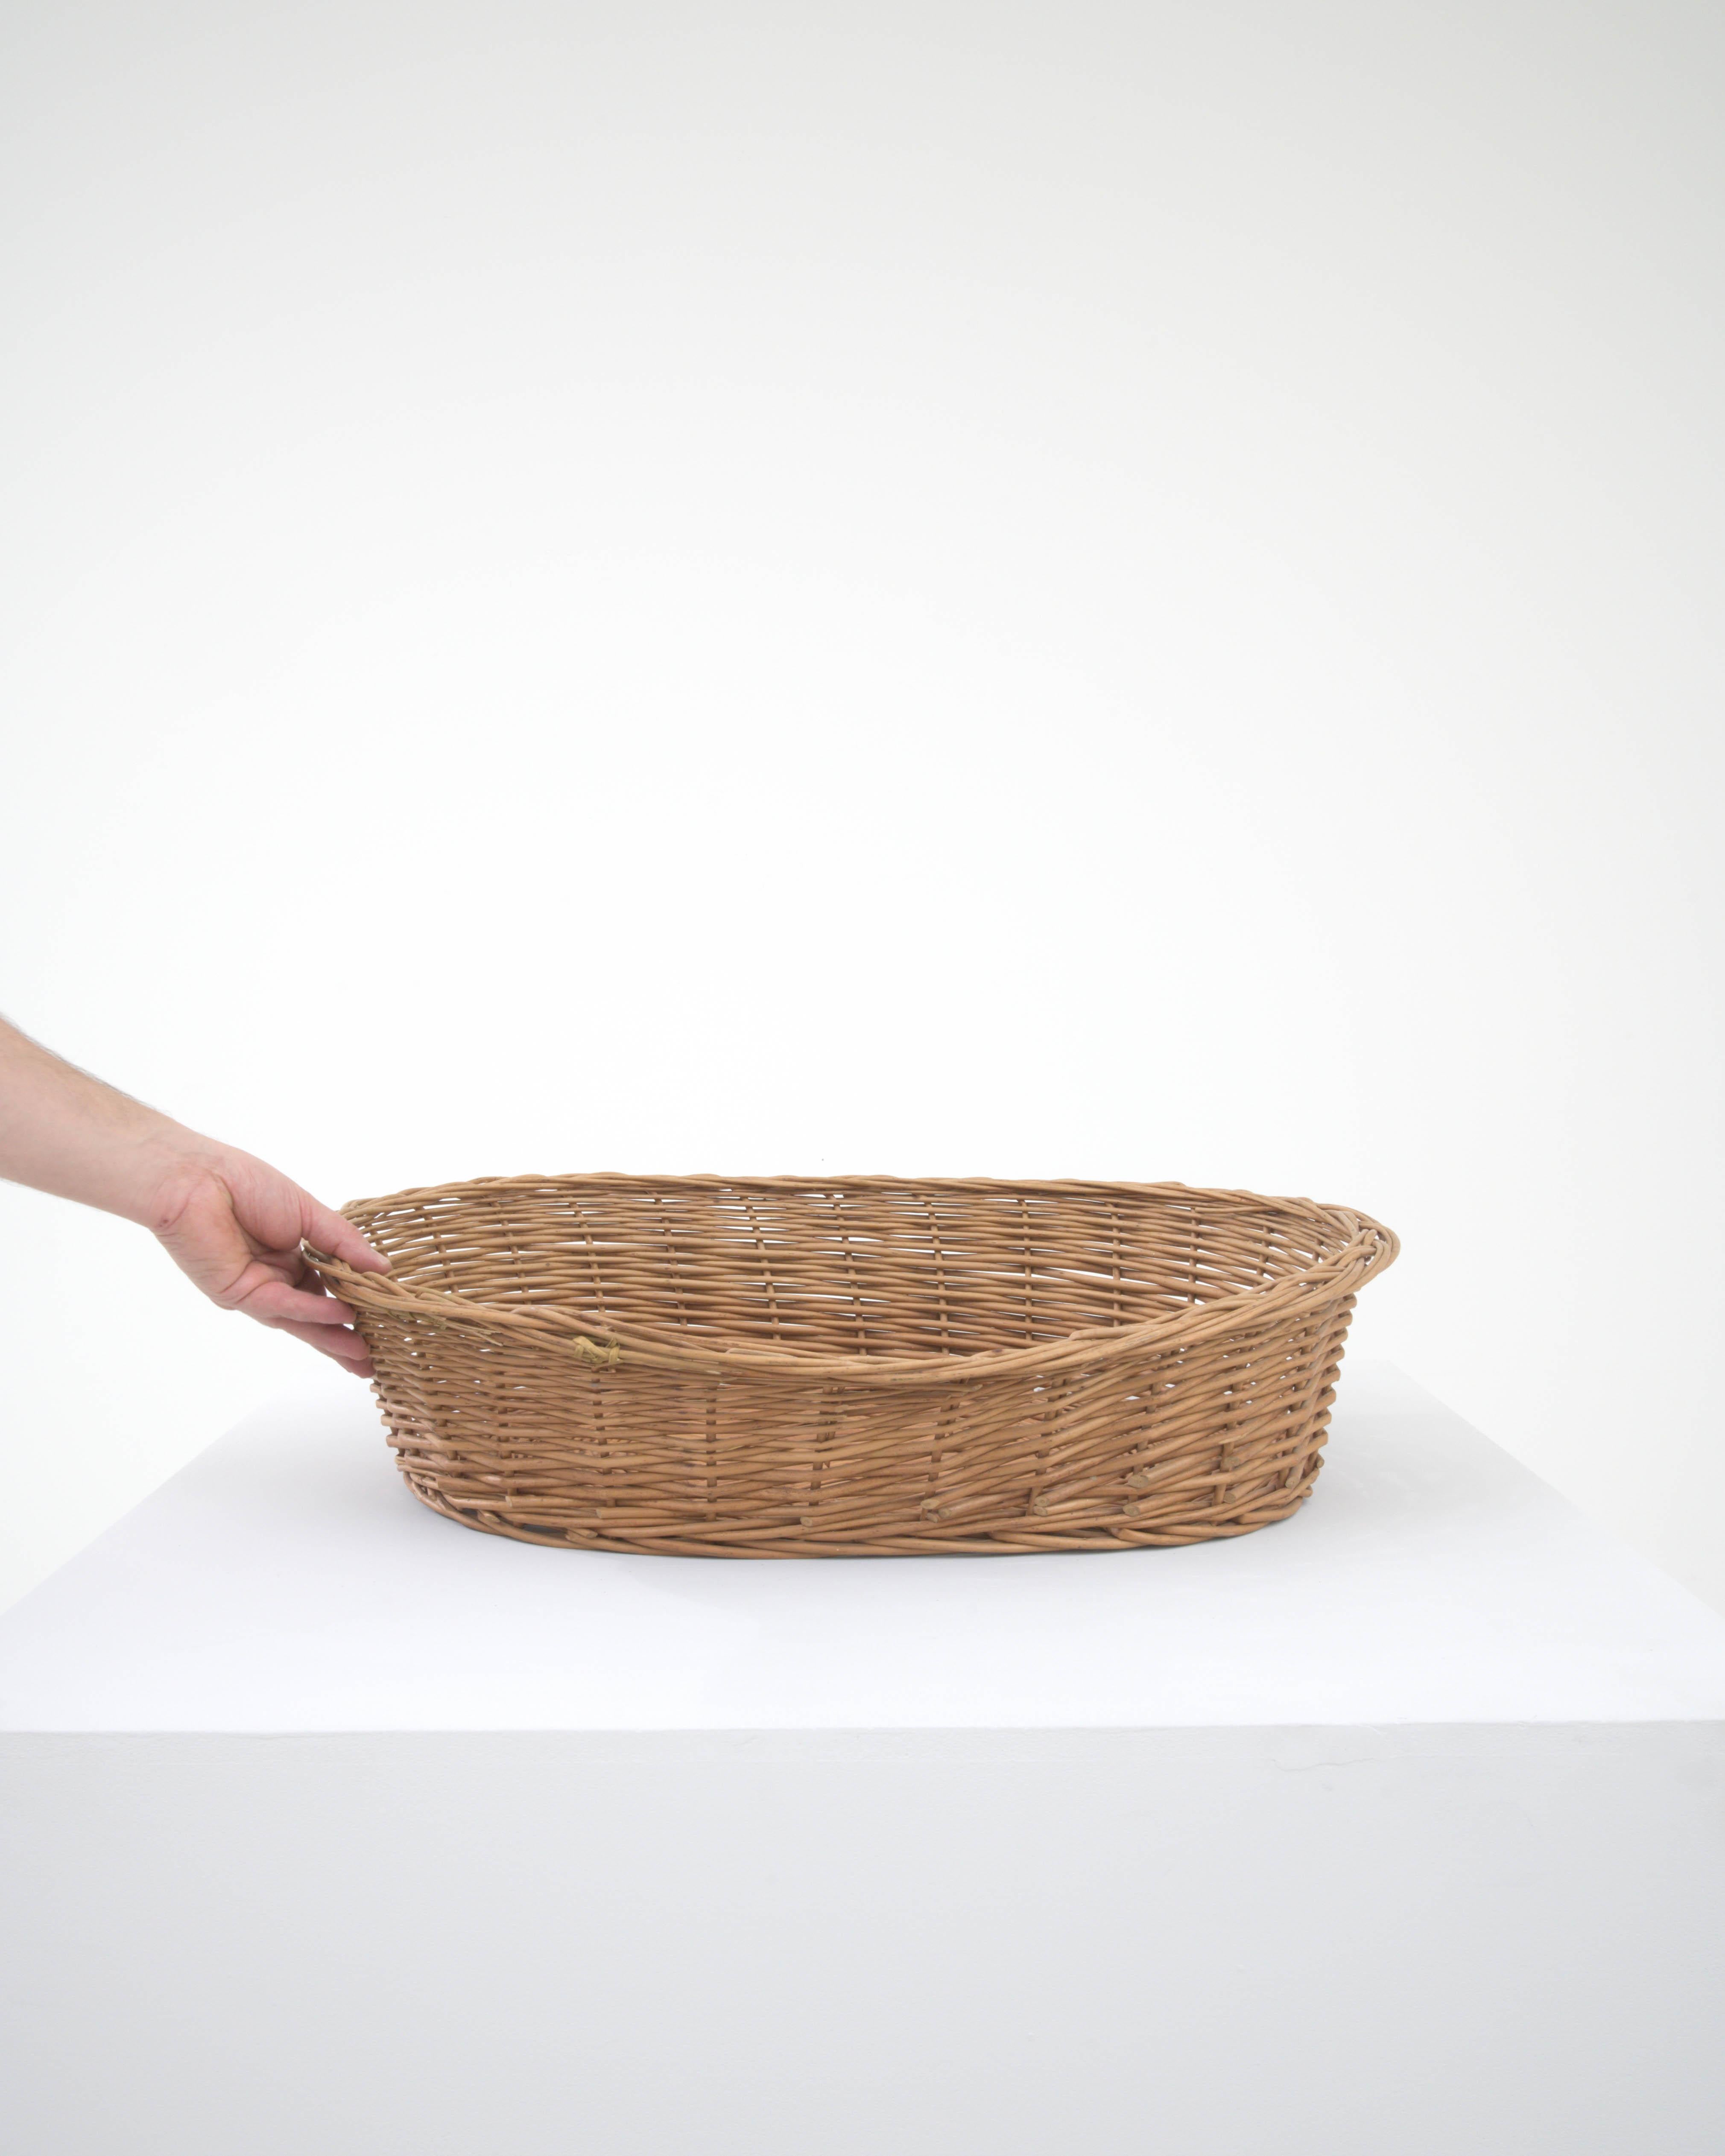 This 20th Century Belgian Wicker Basket brings the allure of rustic craftsmanship into your living space. Its expansive, shallow design makes it an ideal choice for displaying fresh fruit on a kitchen island or serving bread at a family gathering.